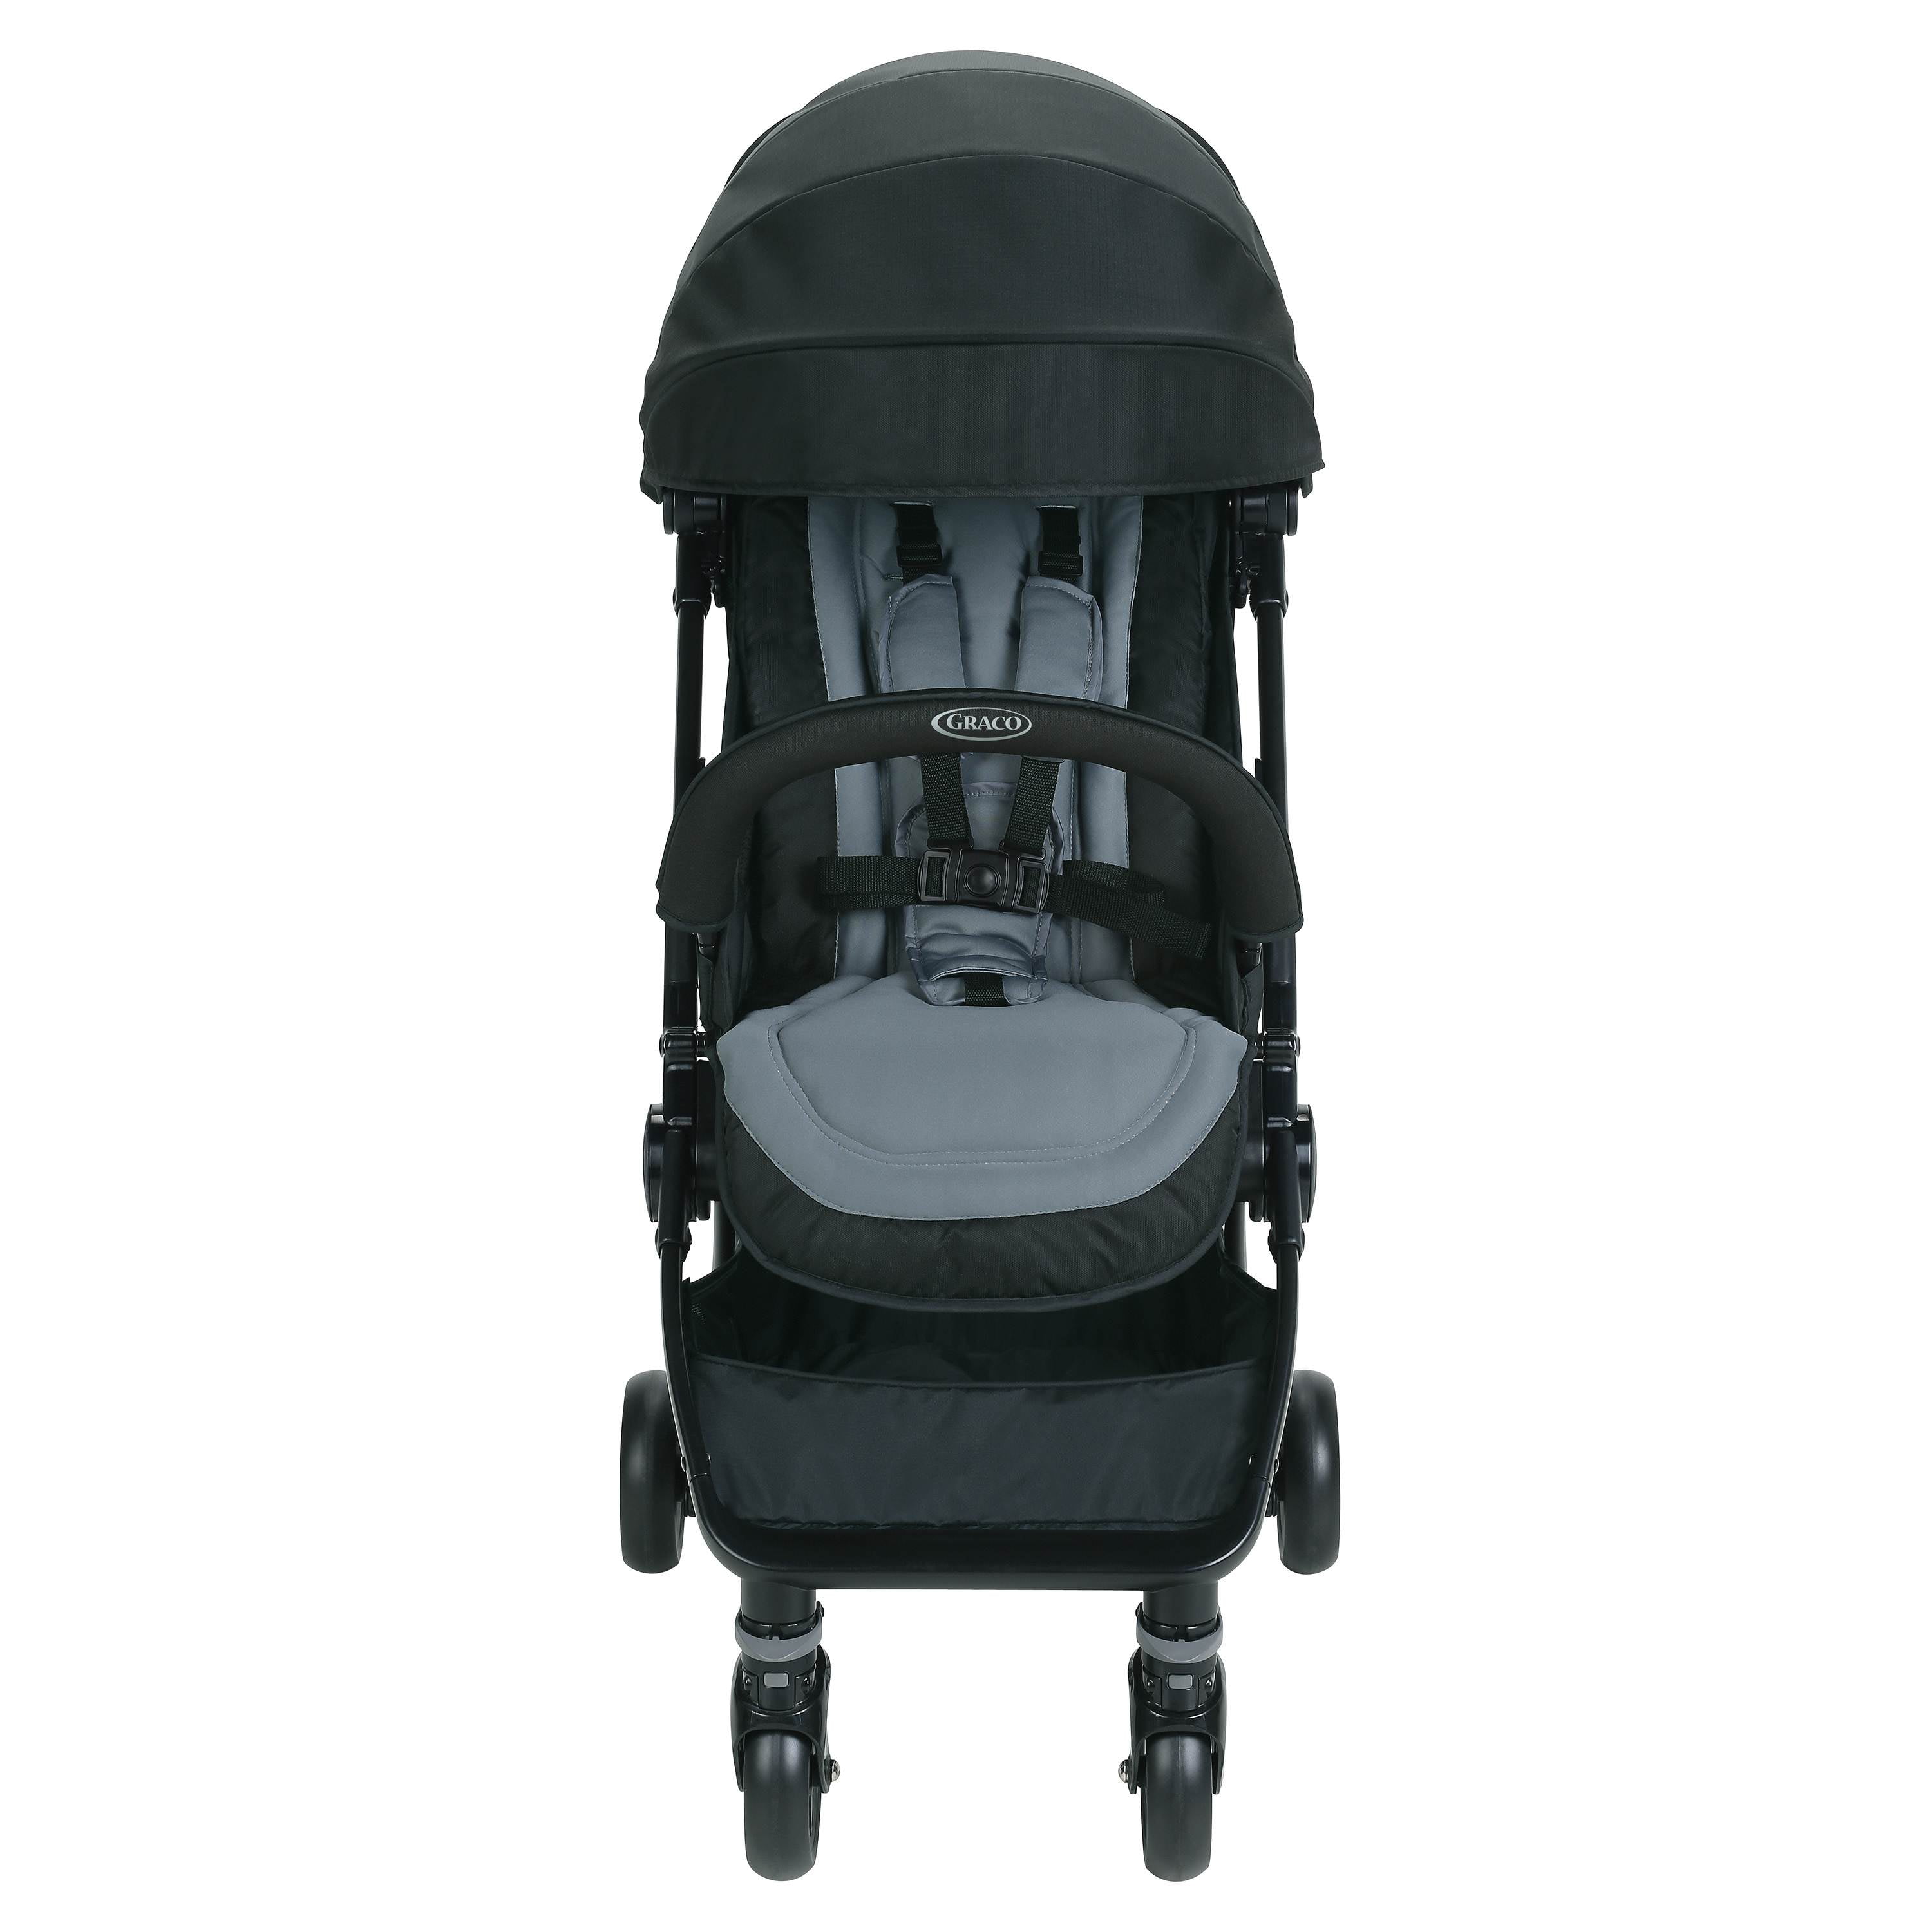 quick connect stroller